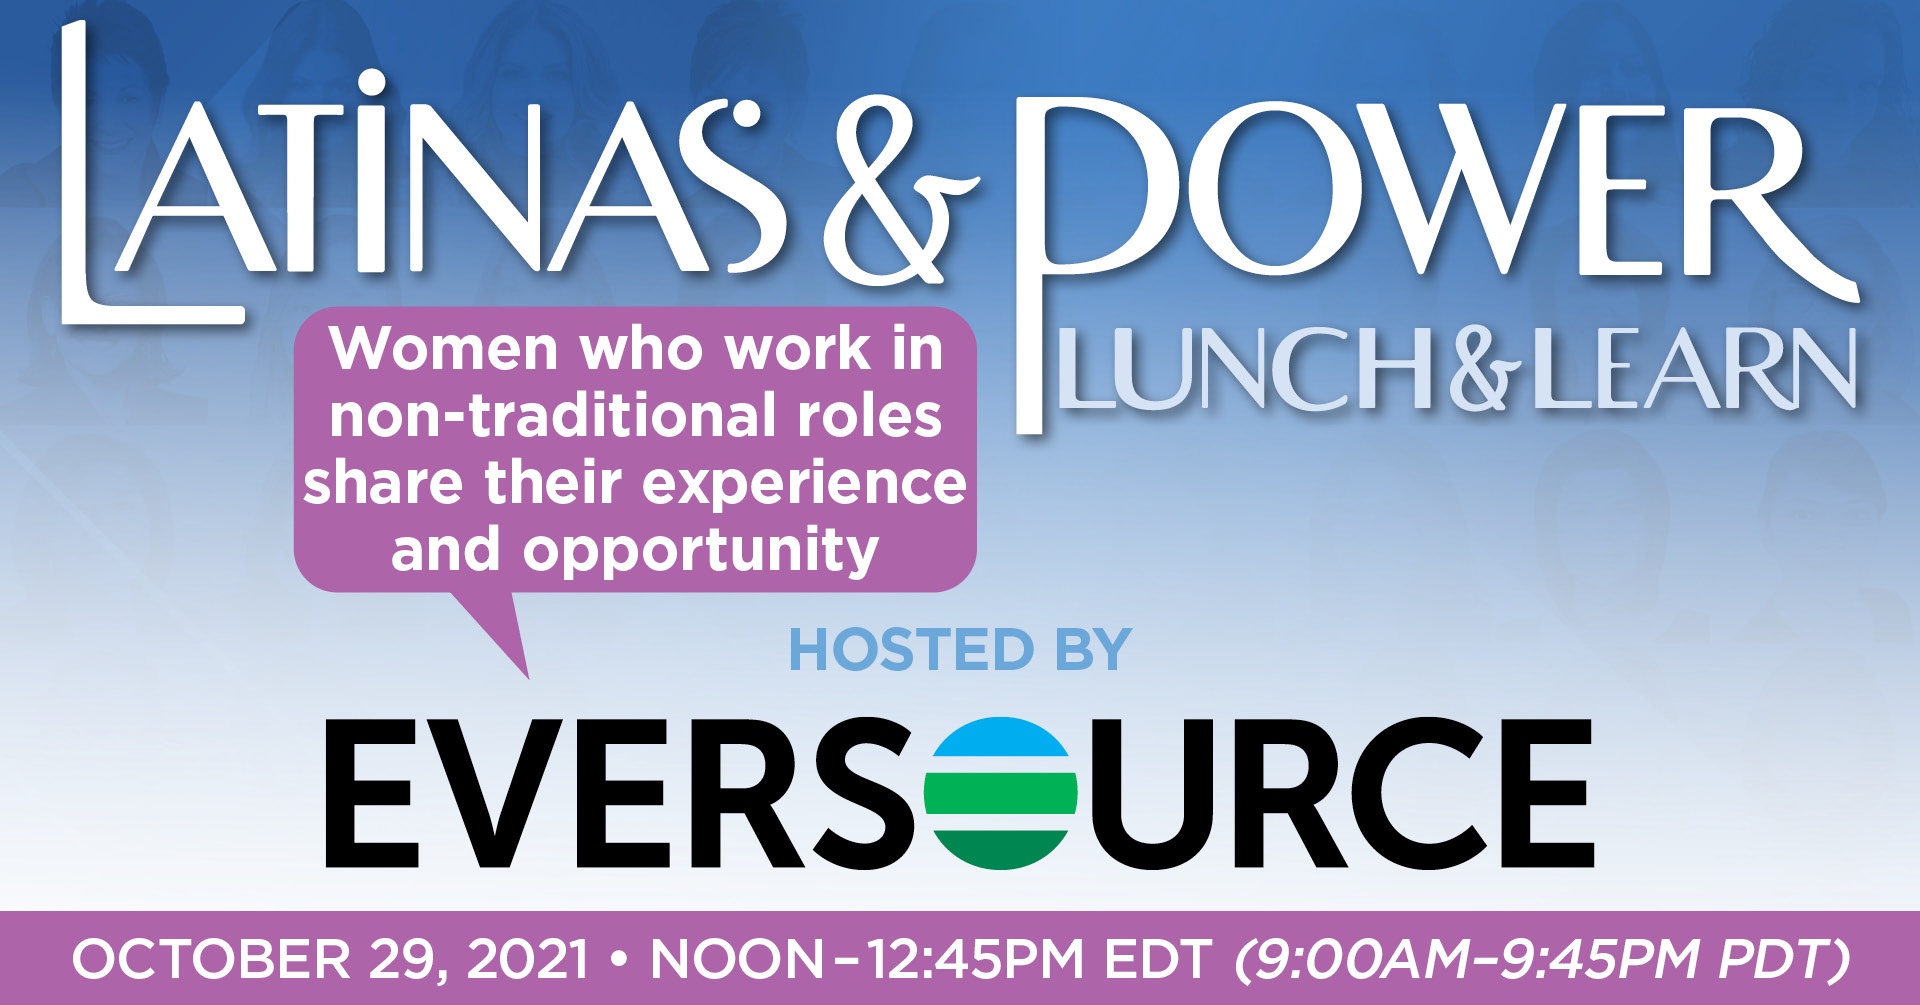 WATCH – Lunch & Learn: Women Who Work in Non-Traditional Roles | Oct 29, 2021